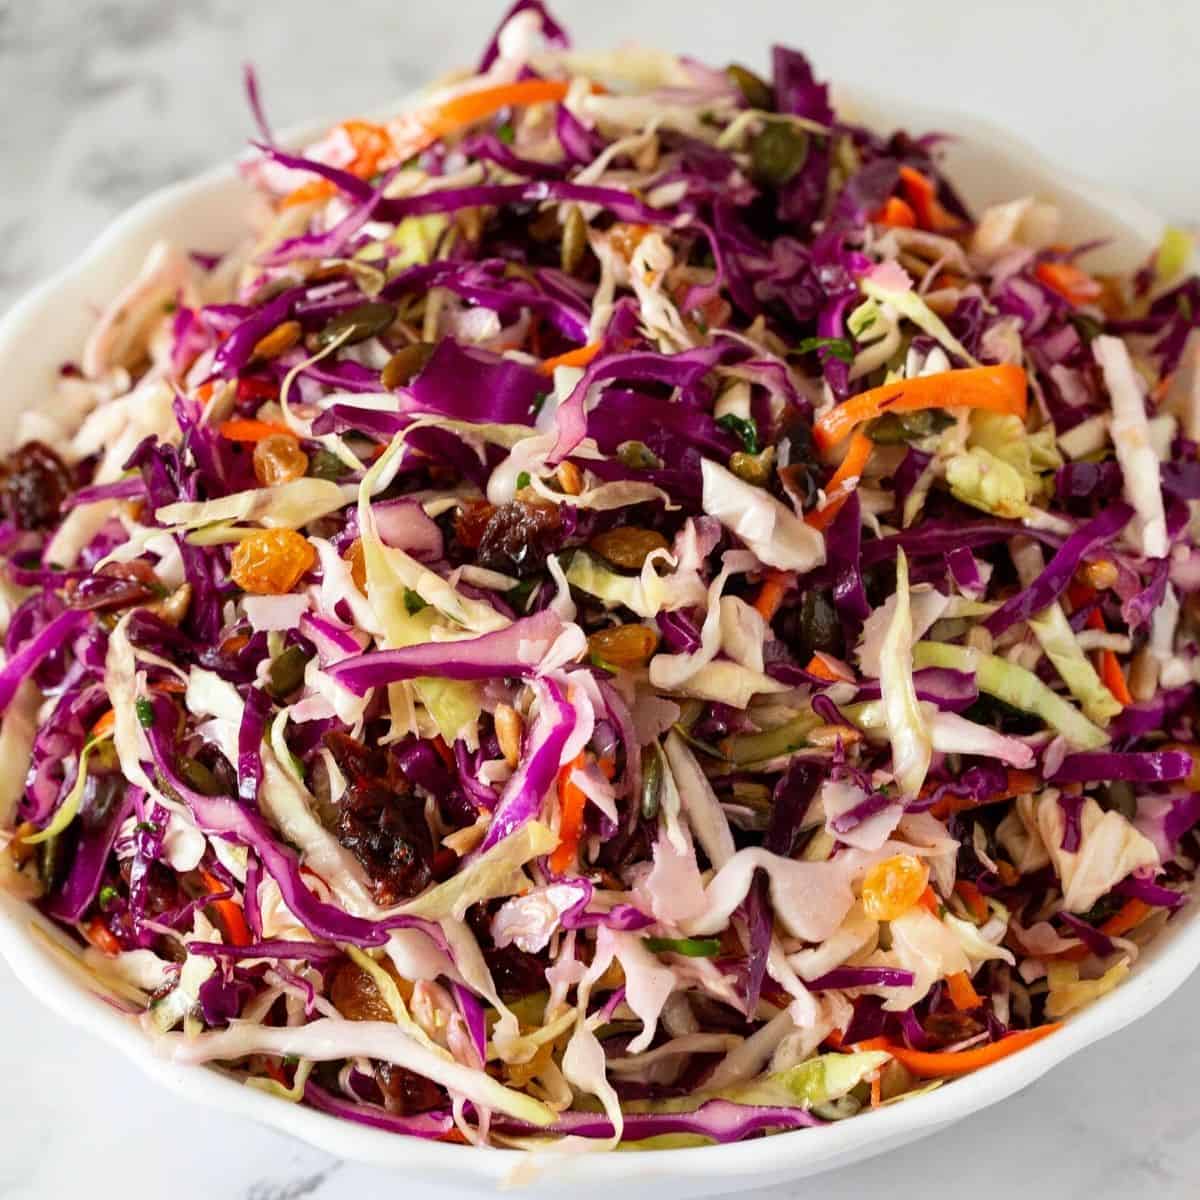 A bowl with shredded cabbage salad.